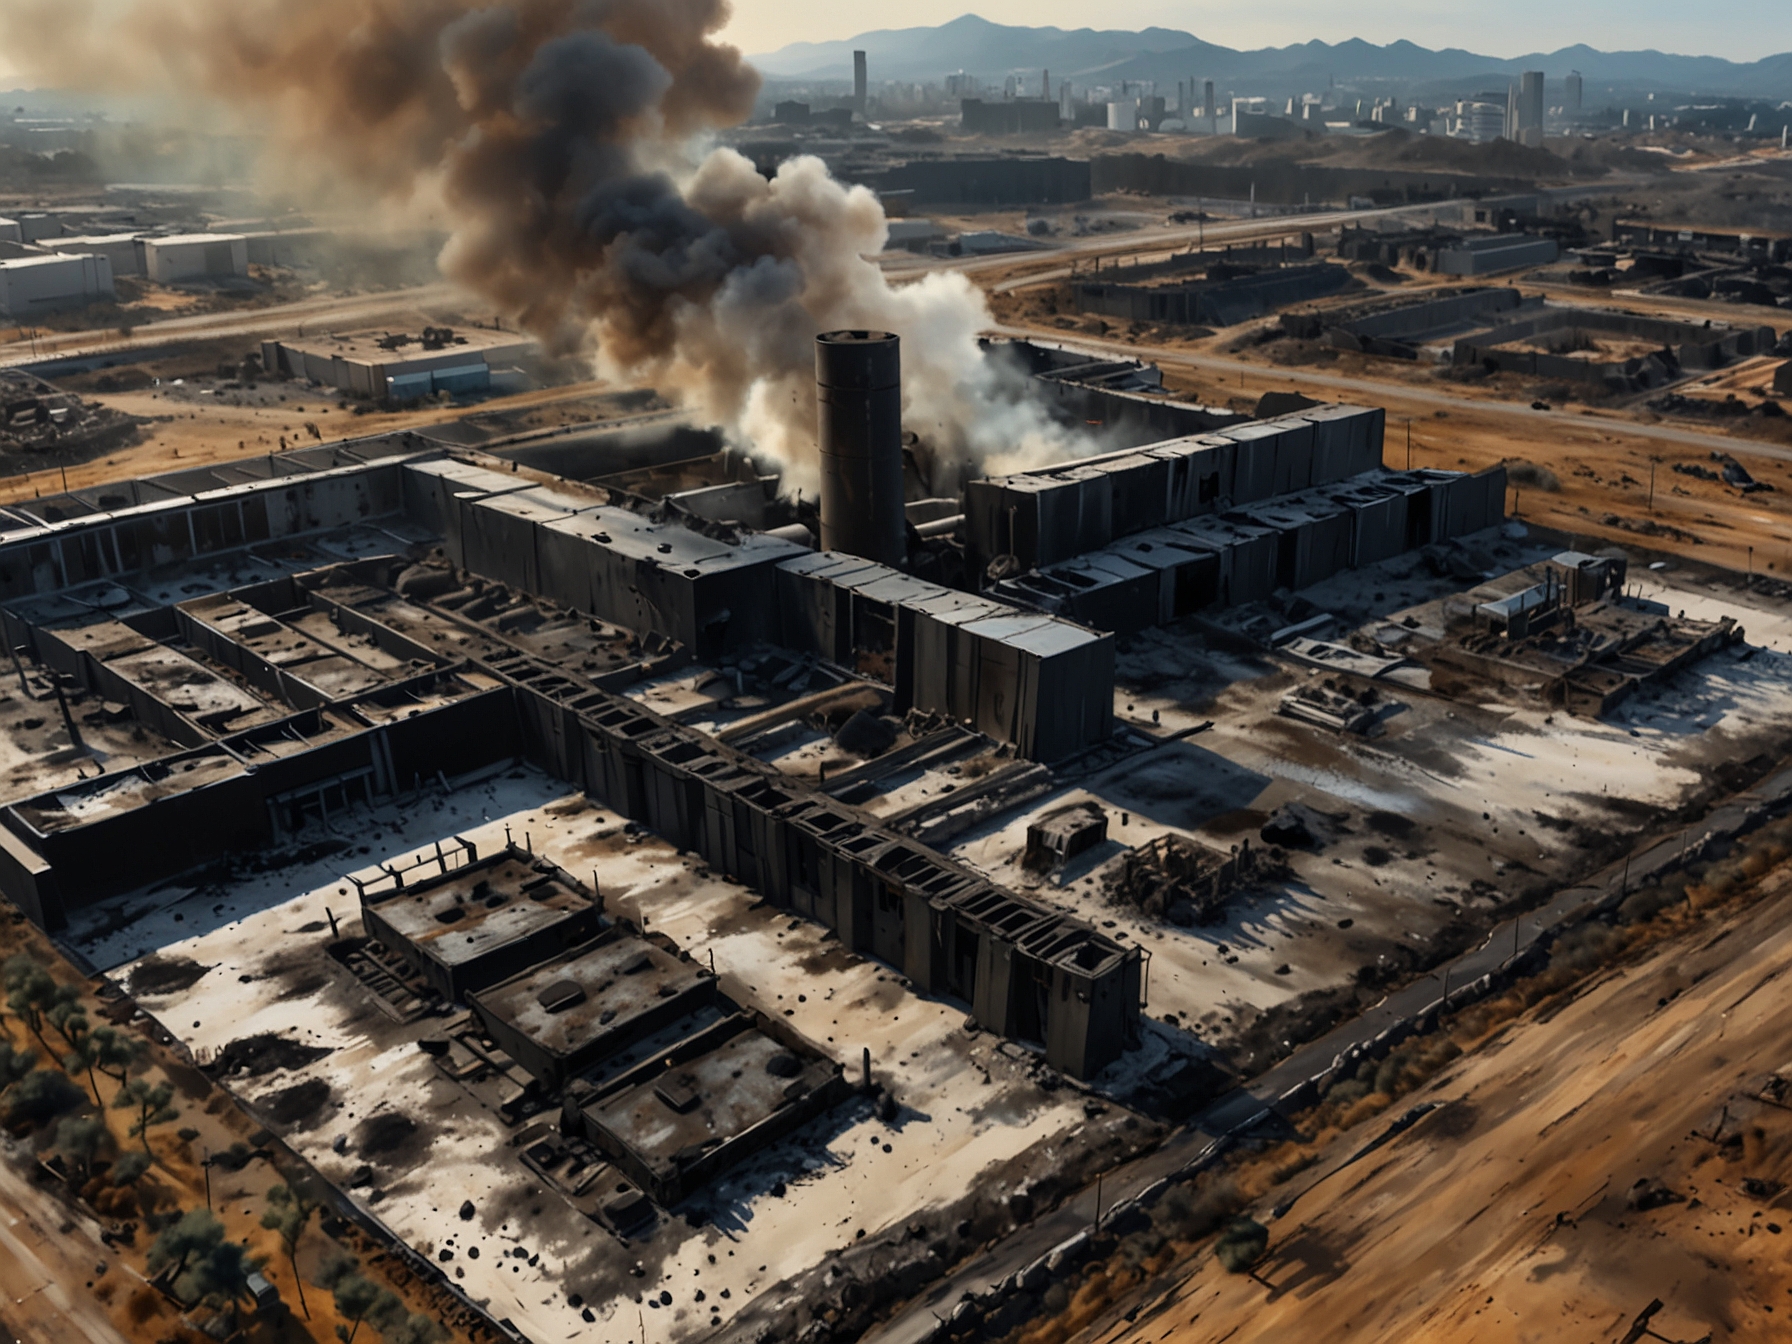 Aerial view of the burnt remains of the South Korean lithium battery plant showing destroyed structures and blackened debris scattered across the facility.